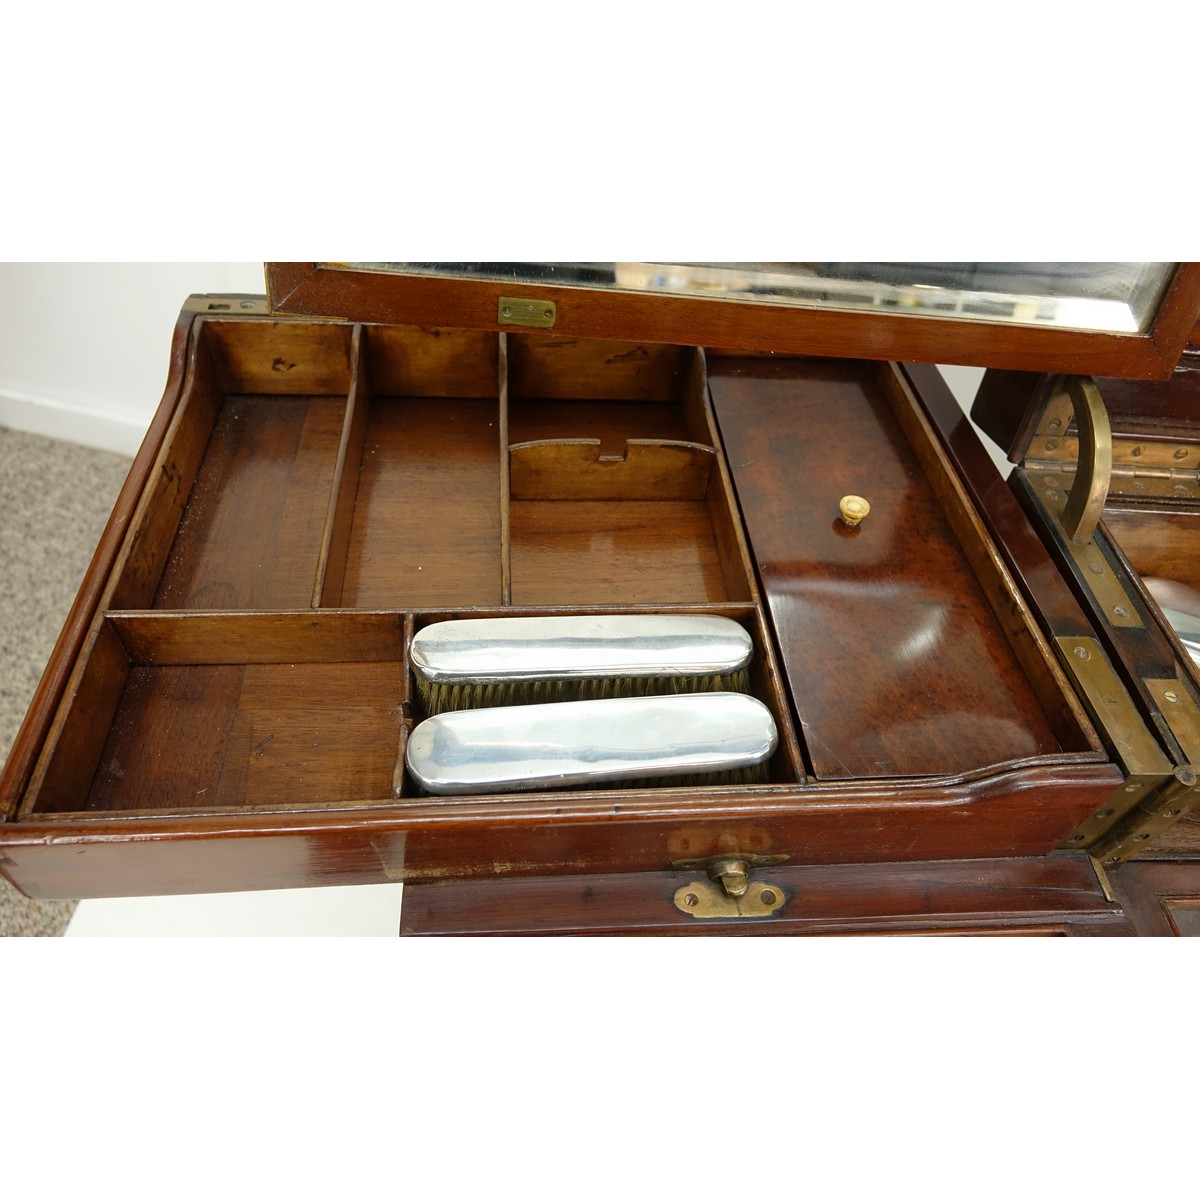 Attributed to: George Betjeman & Sons Circa 1910 Edwardian Mahogany Enclosed Dressing Table. The rectangular hinged top enclosing an interior fitted with three beveled mirror plates, above two hinged compartments flanked by two glass slides and a recessed